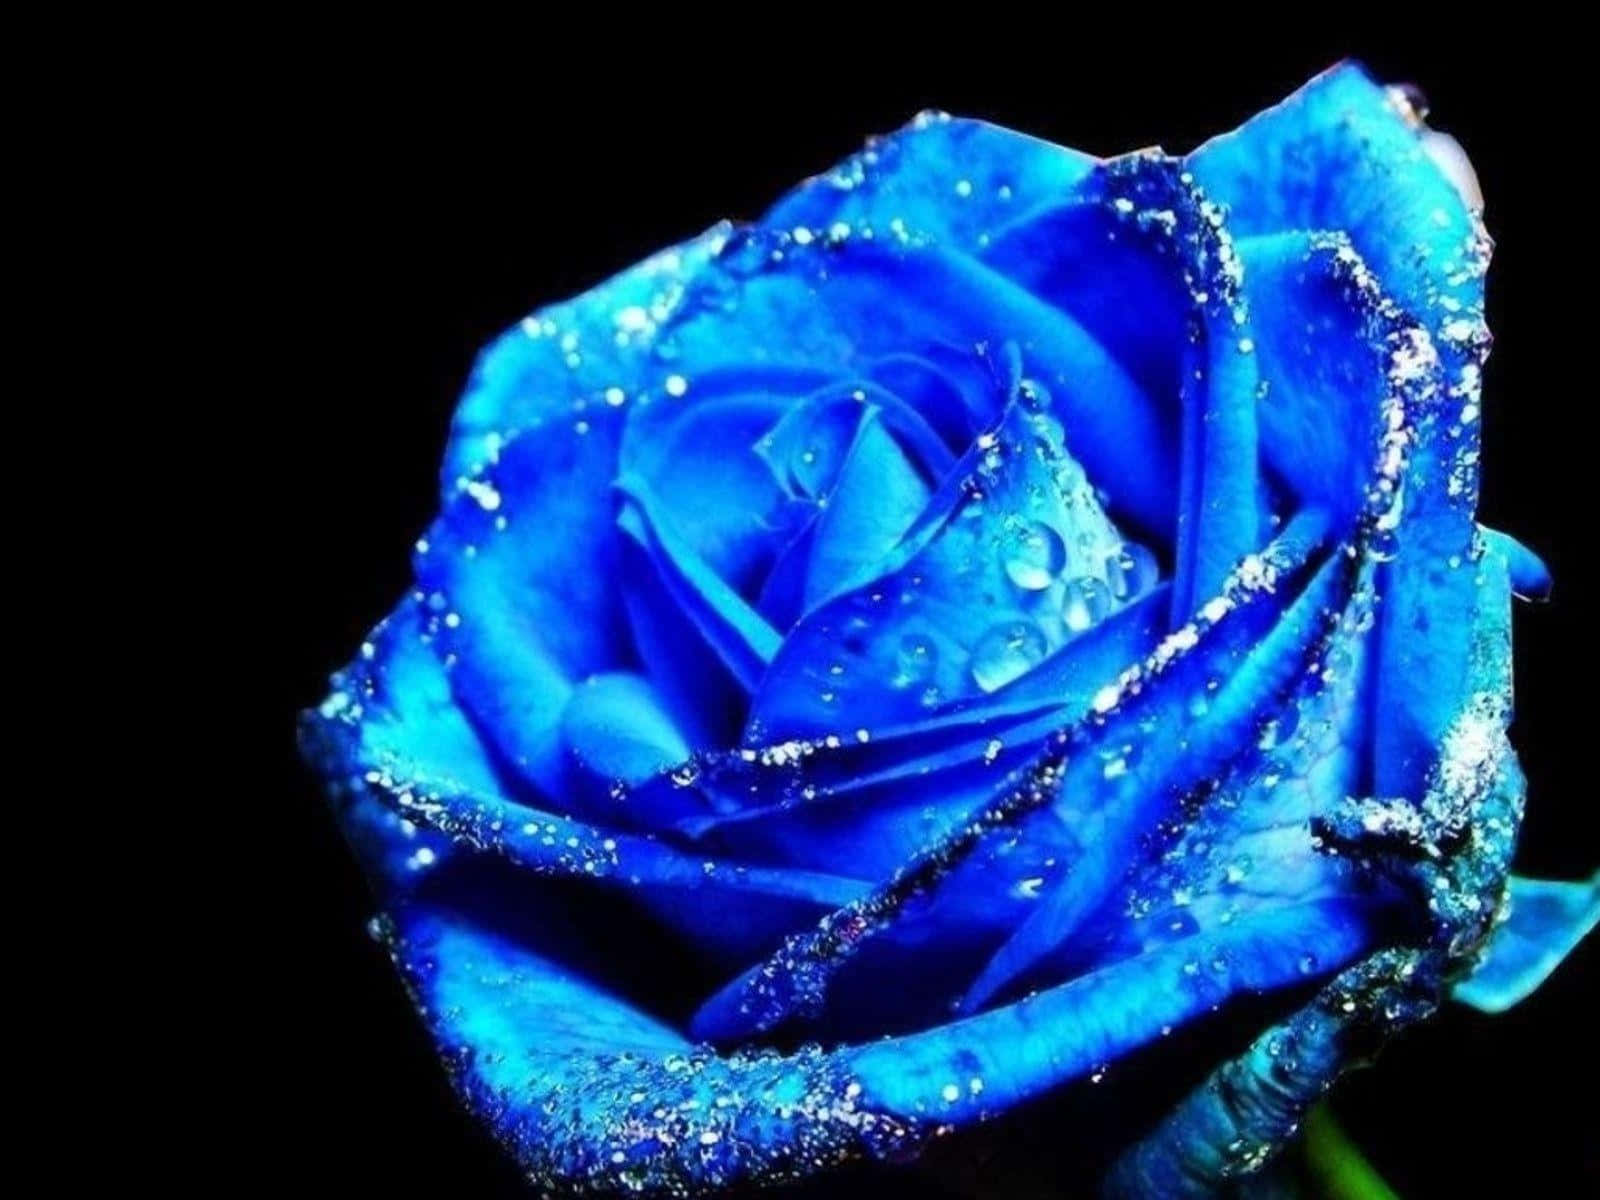 A Rare And Beautiful Blue Rose In Full Bloom